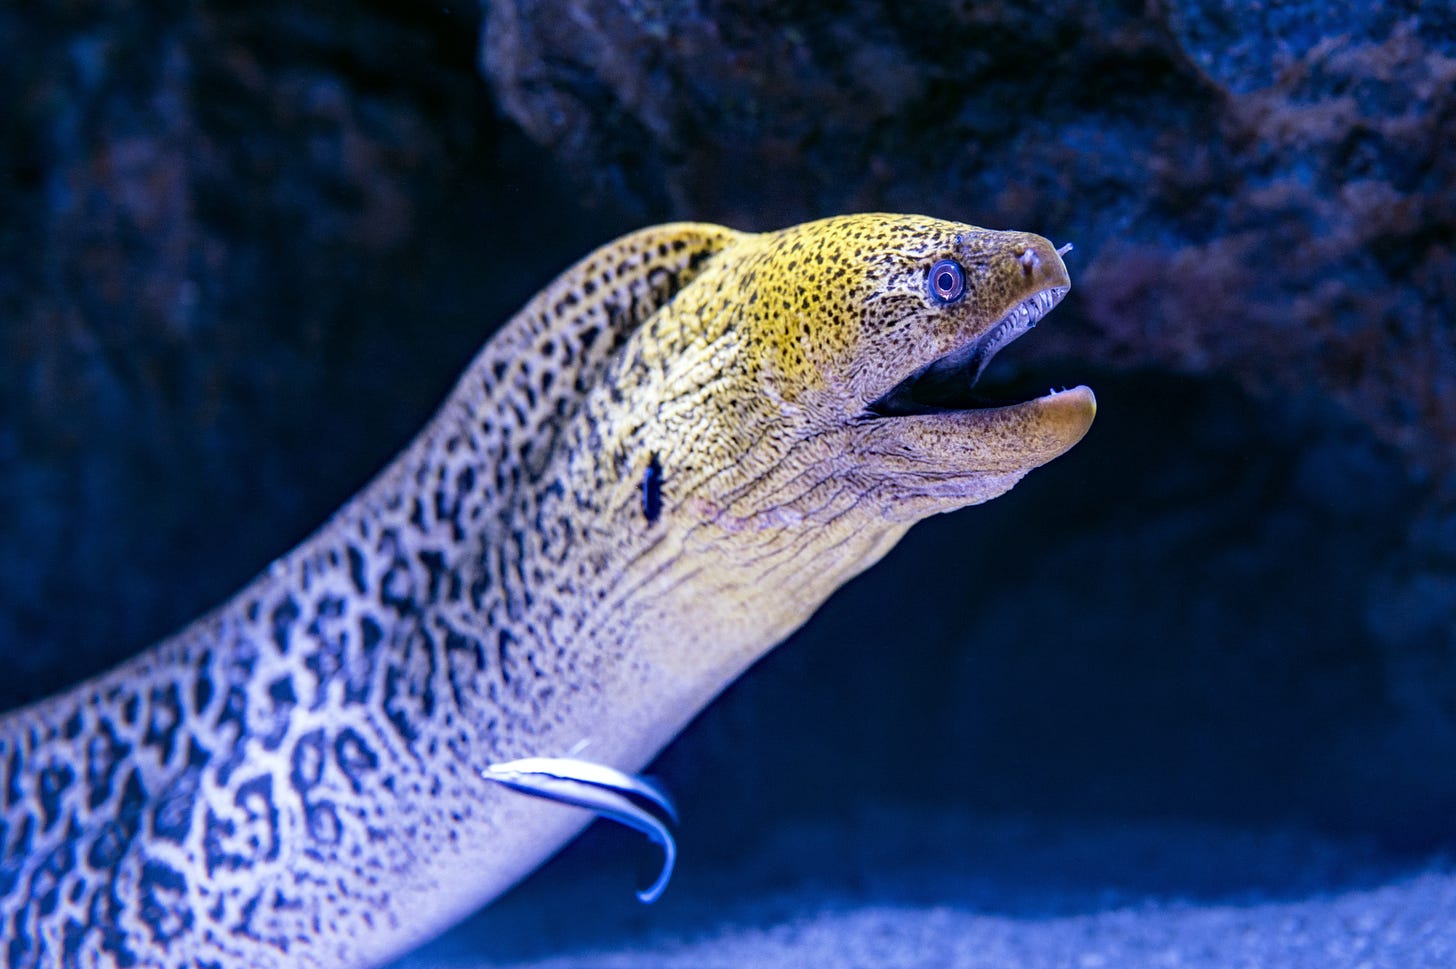 A freaking looking spotted eel with its mouth open